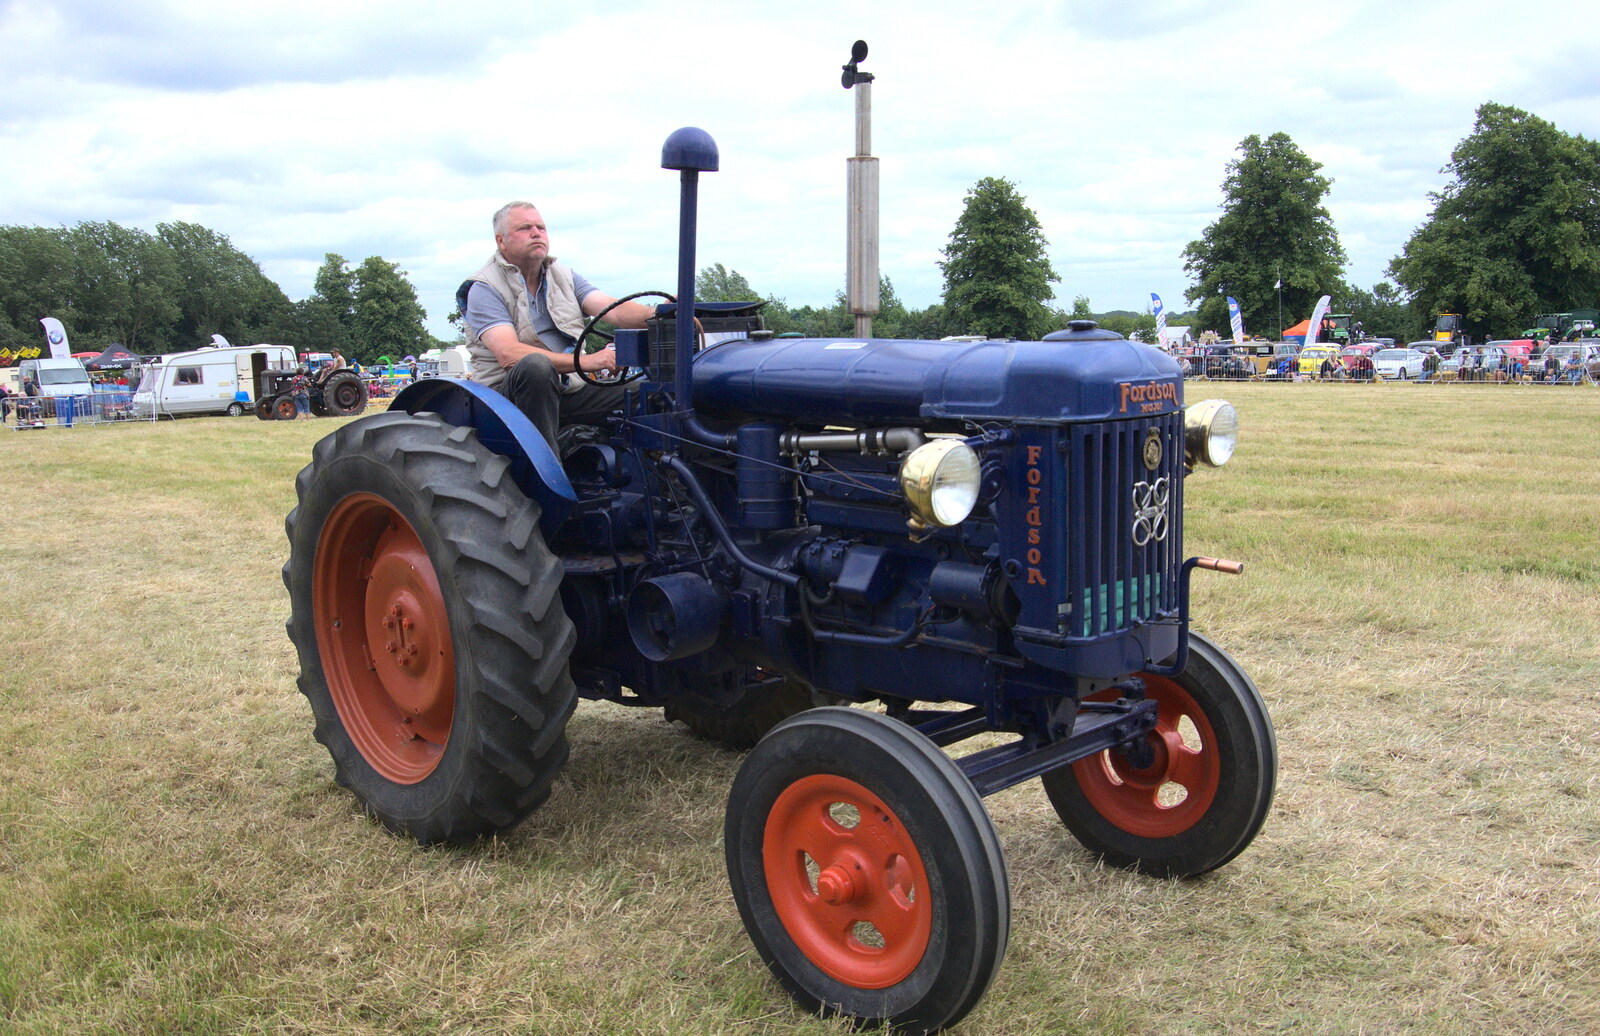 A happy tractor driver from The Formerly-Known-As-The-Eye-Show, Palgrave, Suffolk - 17th June 2018